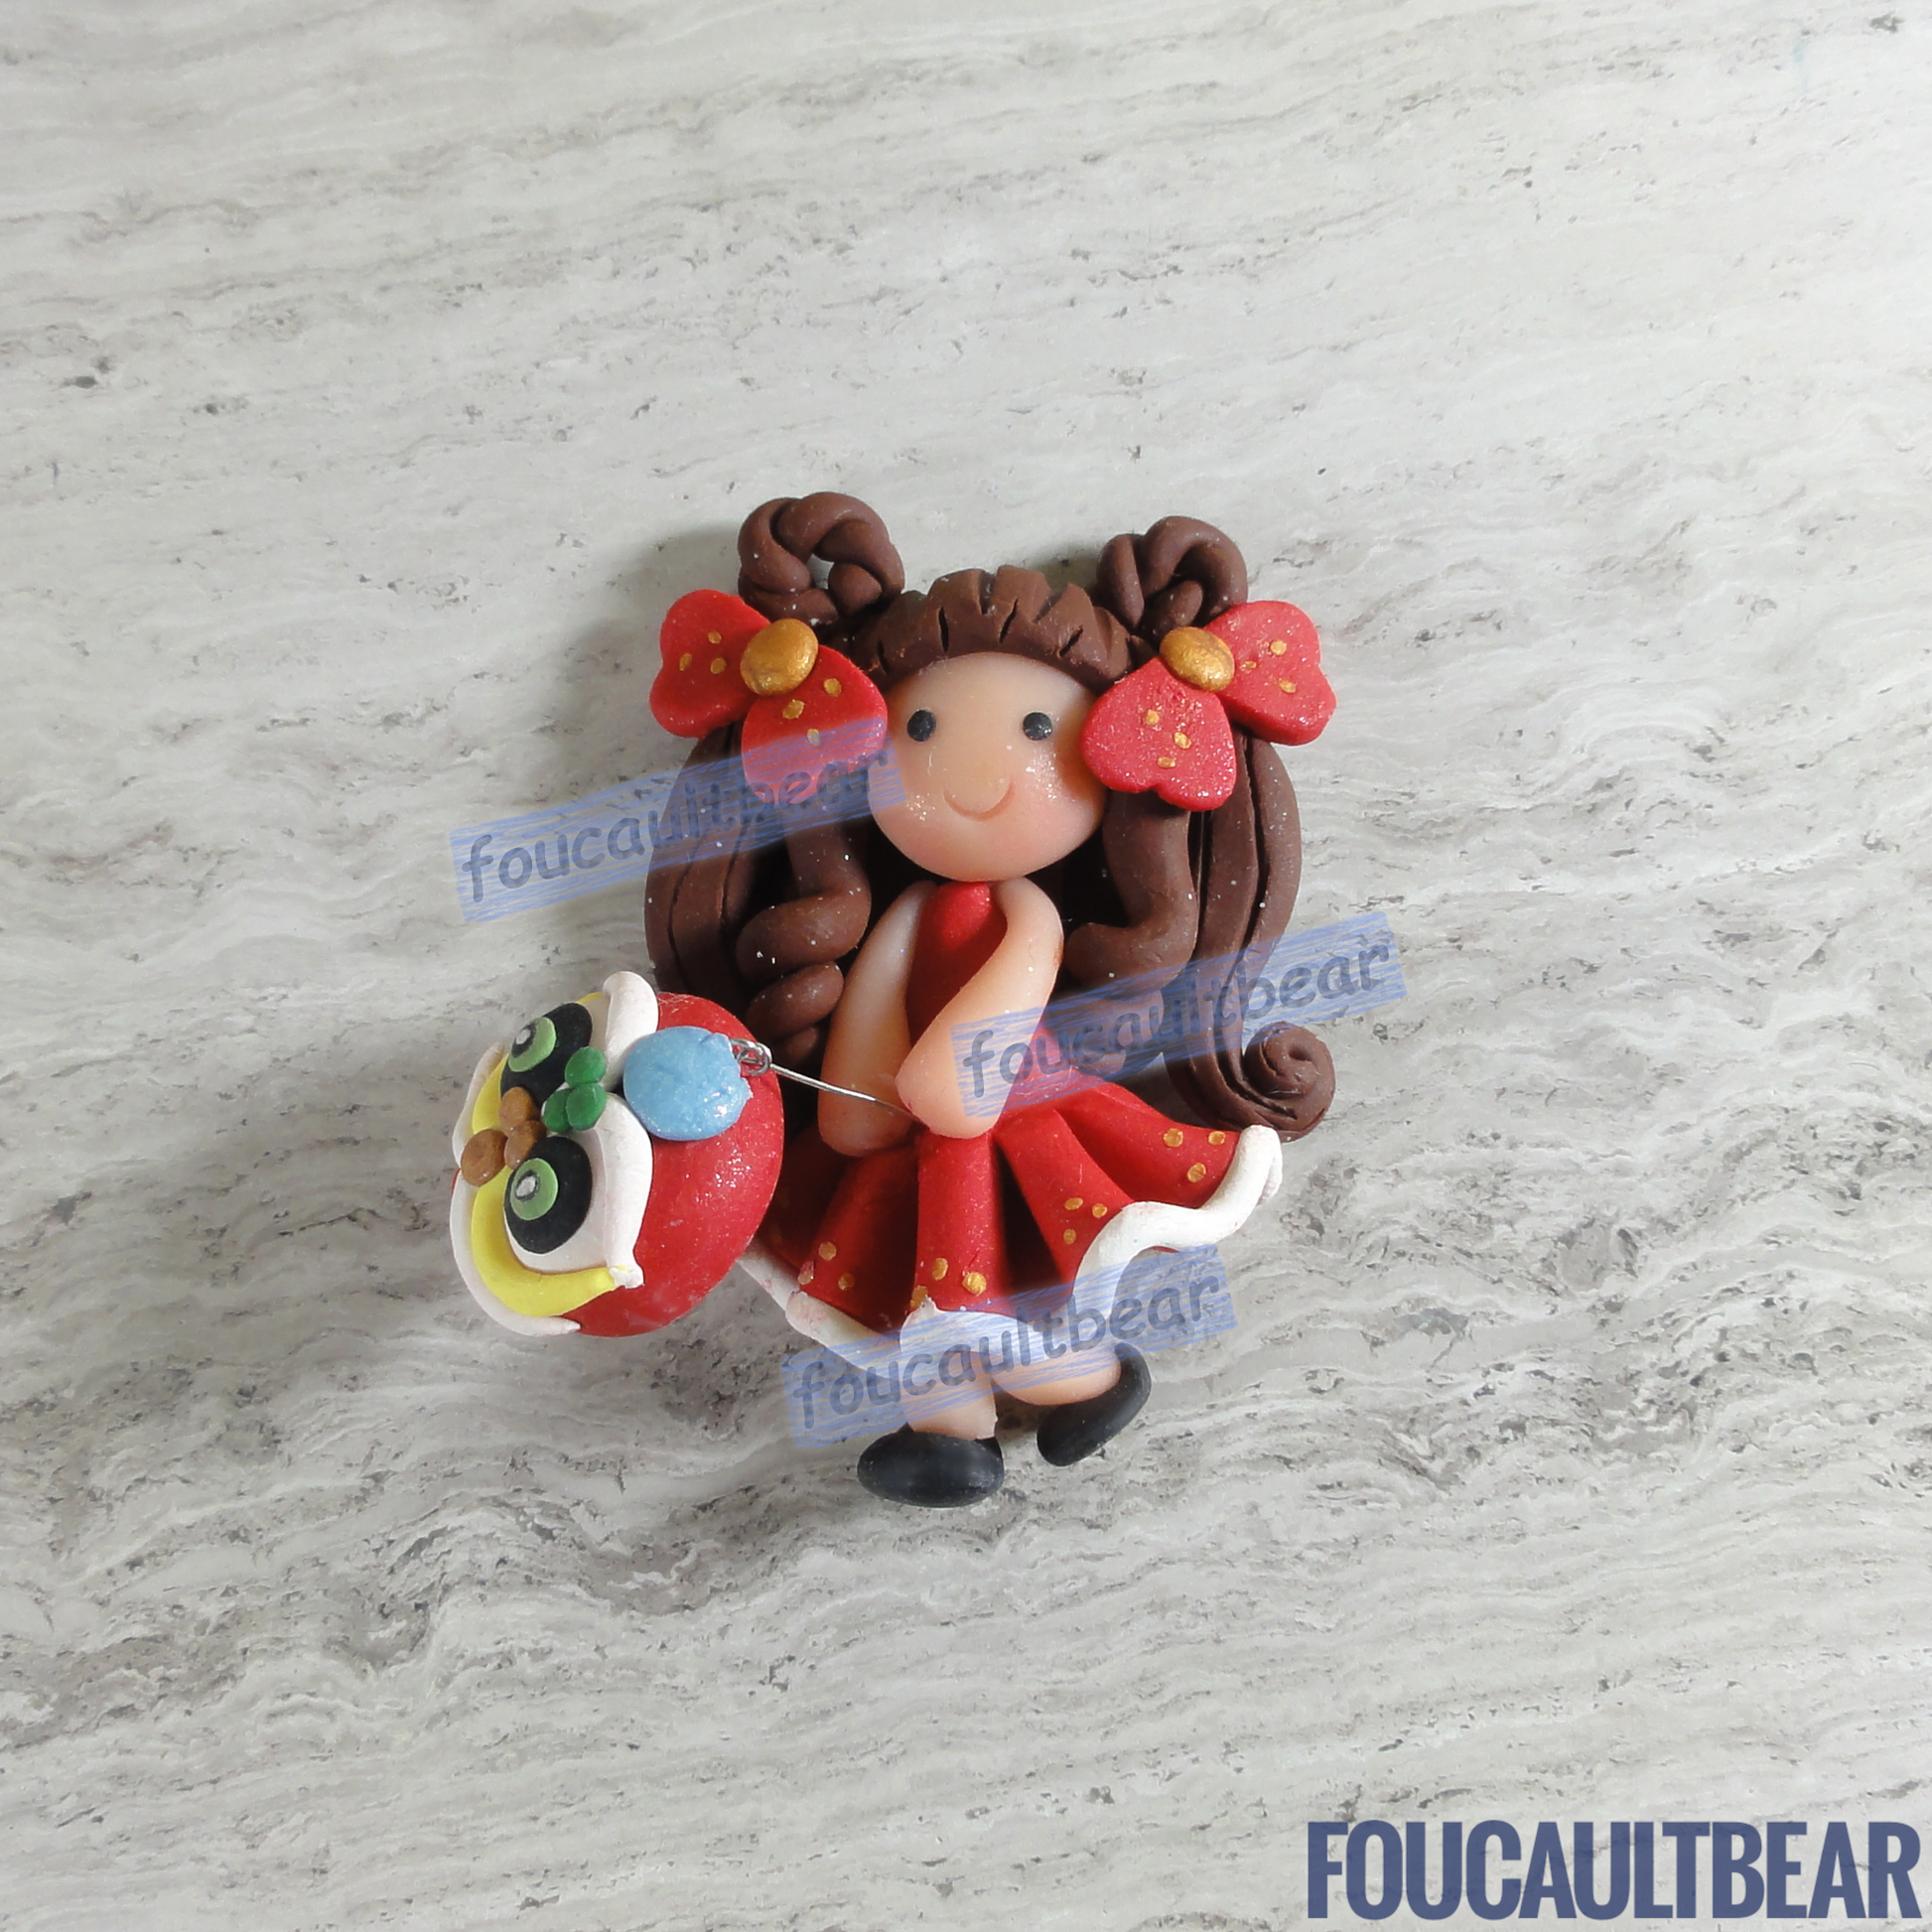 Foucaultbear's HANDMADE CLAY ART FLATBACK. Girl (Brunette) with Lantern. Handmade Polymer Clay Art. For Your Own Creative Use, such as on Hair Bow Barrette Clips, Picture Frames and Refrigerator Magnets. This flatback clay Girl (Brunette) with Lantern looks great on picture frames or any of your art projects. Makes for a cute refrigerator magnet too. A unique and creative gift.